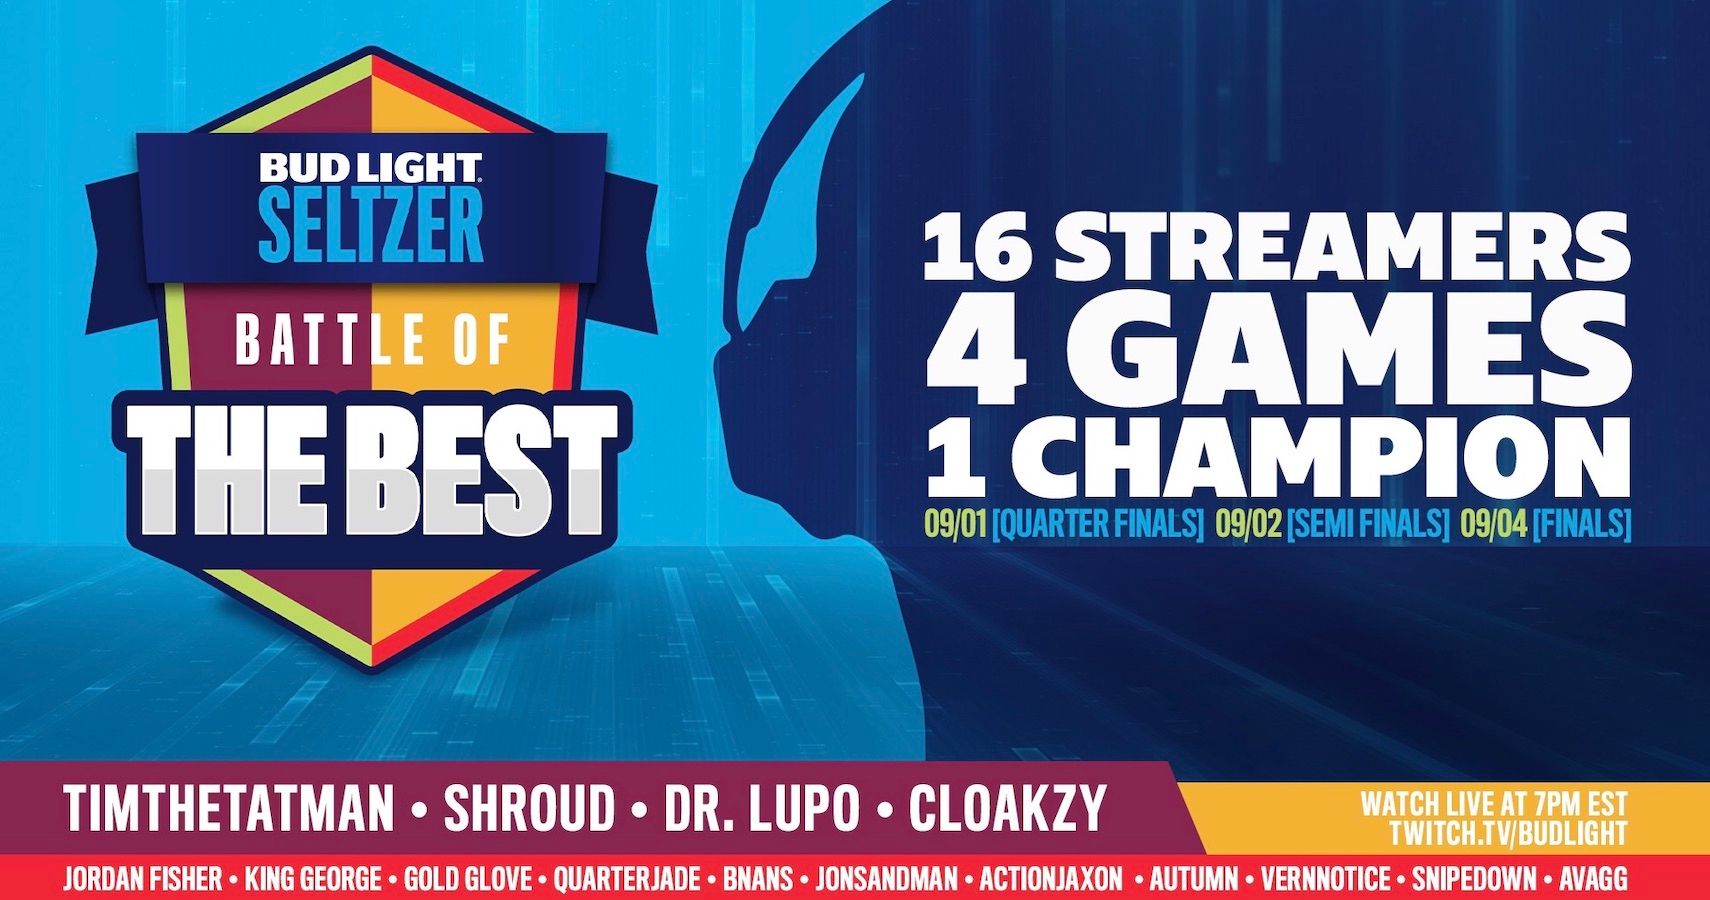 Måge En trofast gå ind Bud Light Launches Battle Of The Best Esports Channel On Twitch